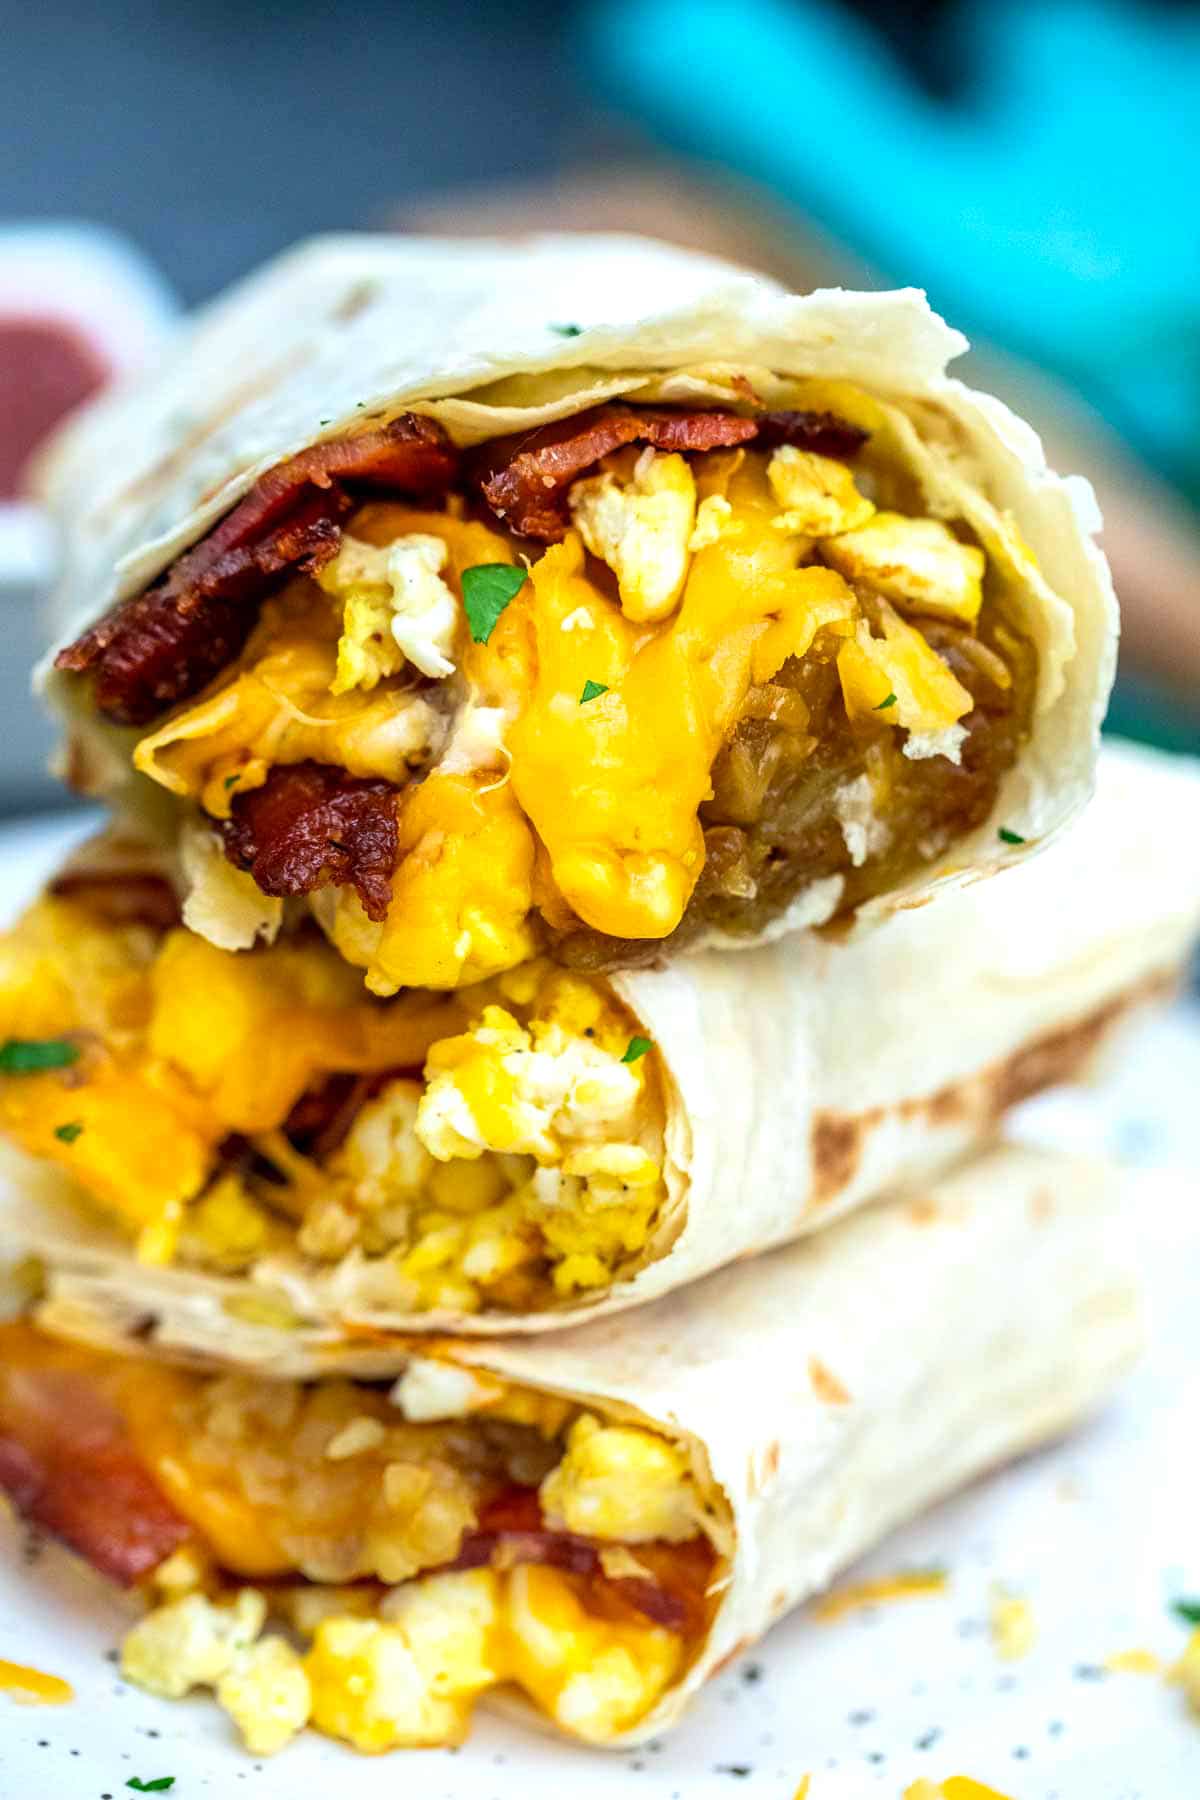 Bacon Egg and Cheese Breakfast Burrito [Video] - Sweet and Savory Meals